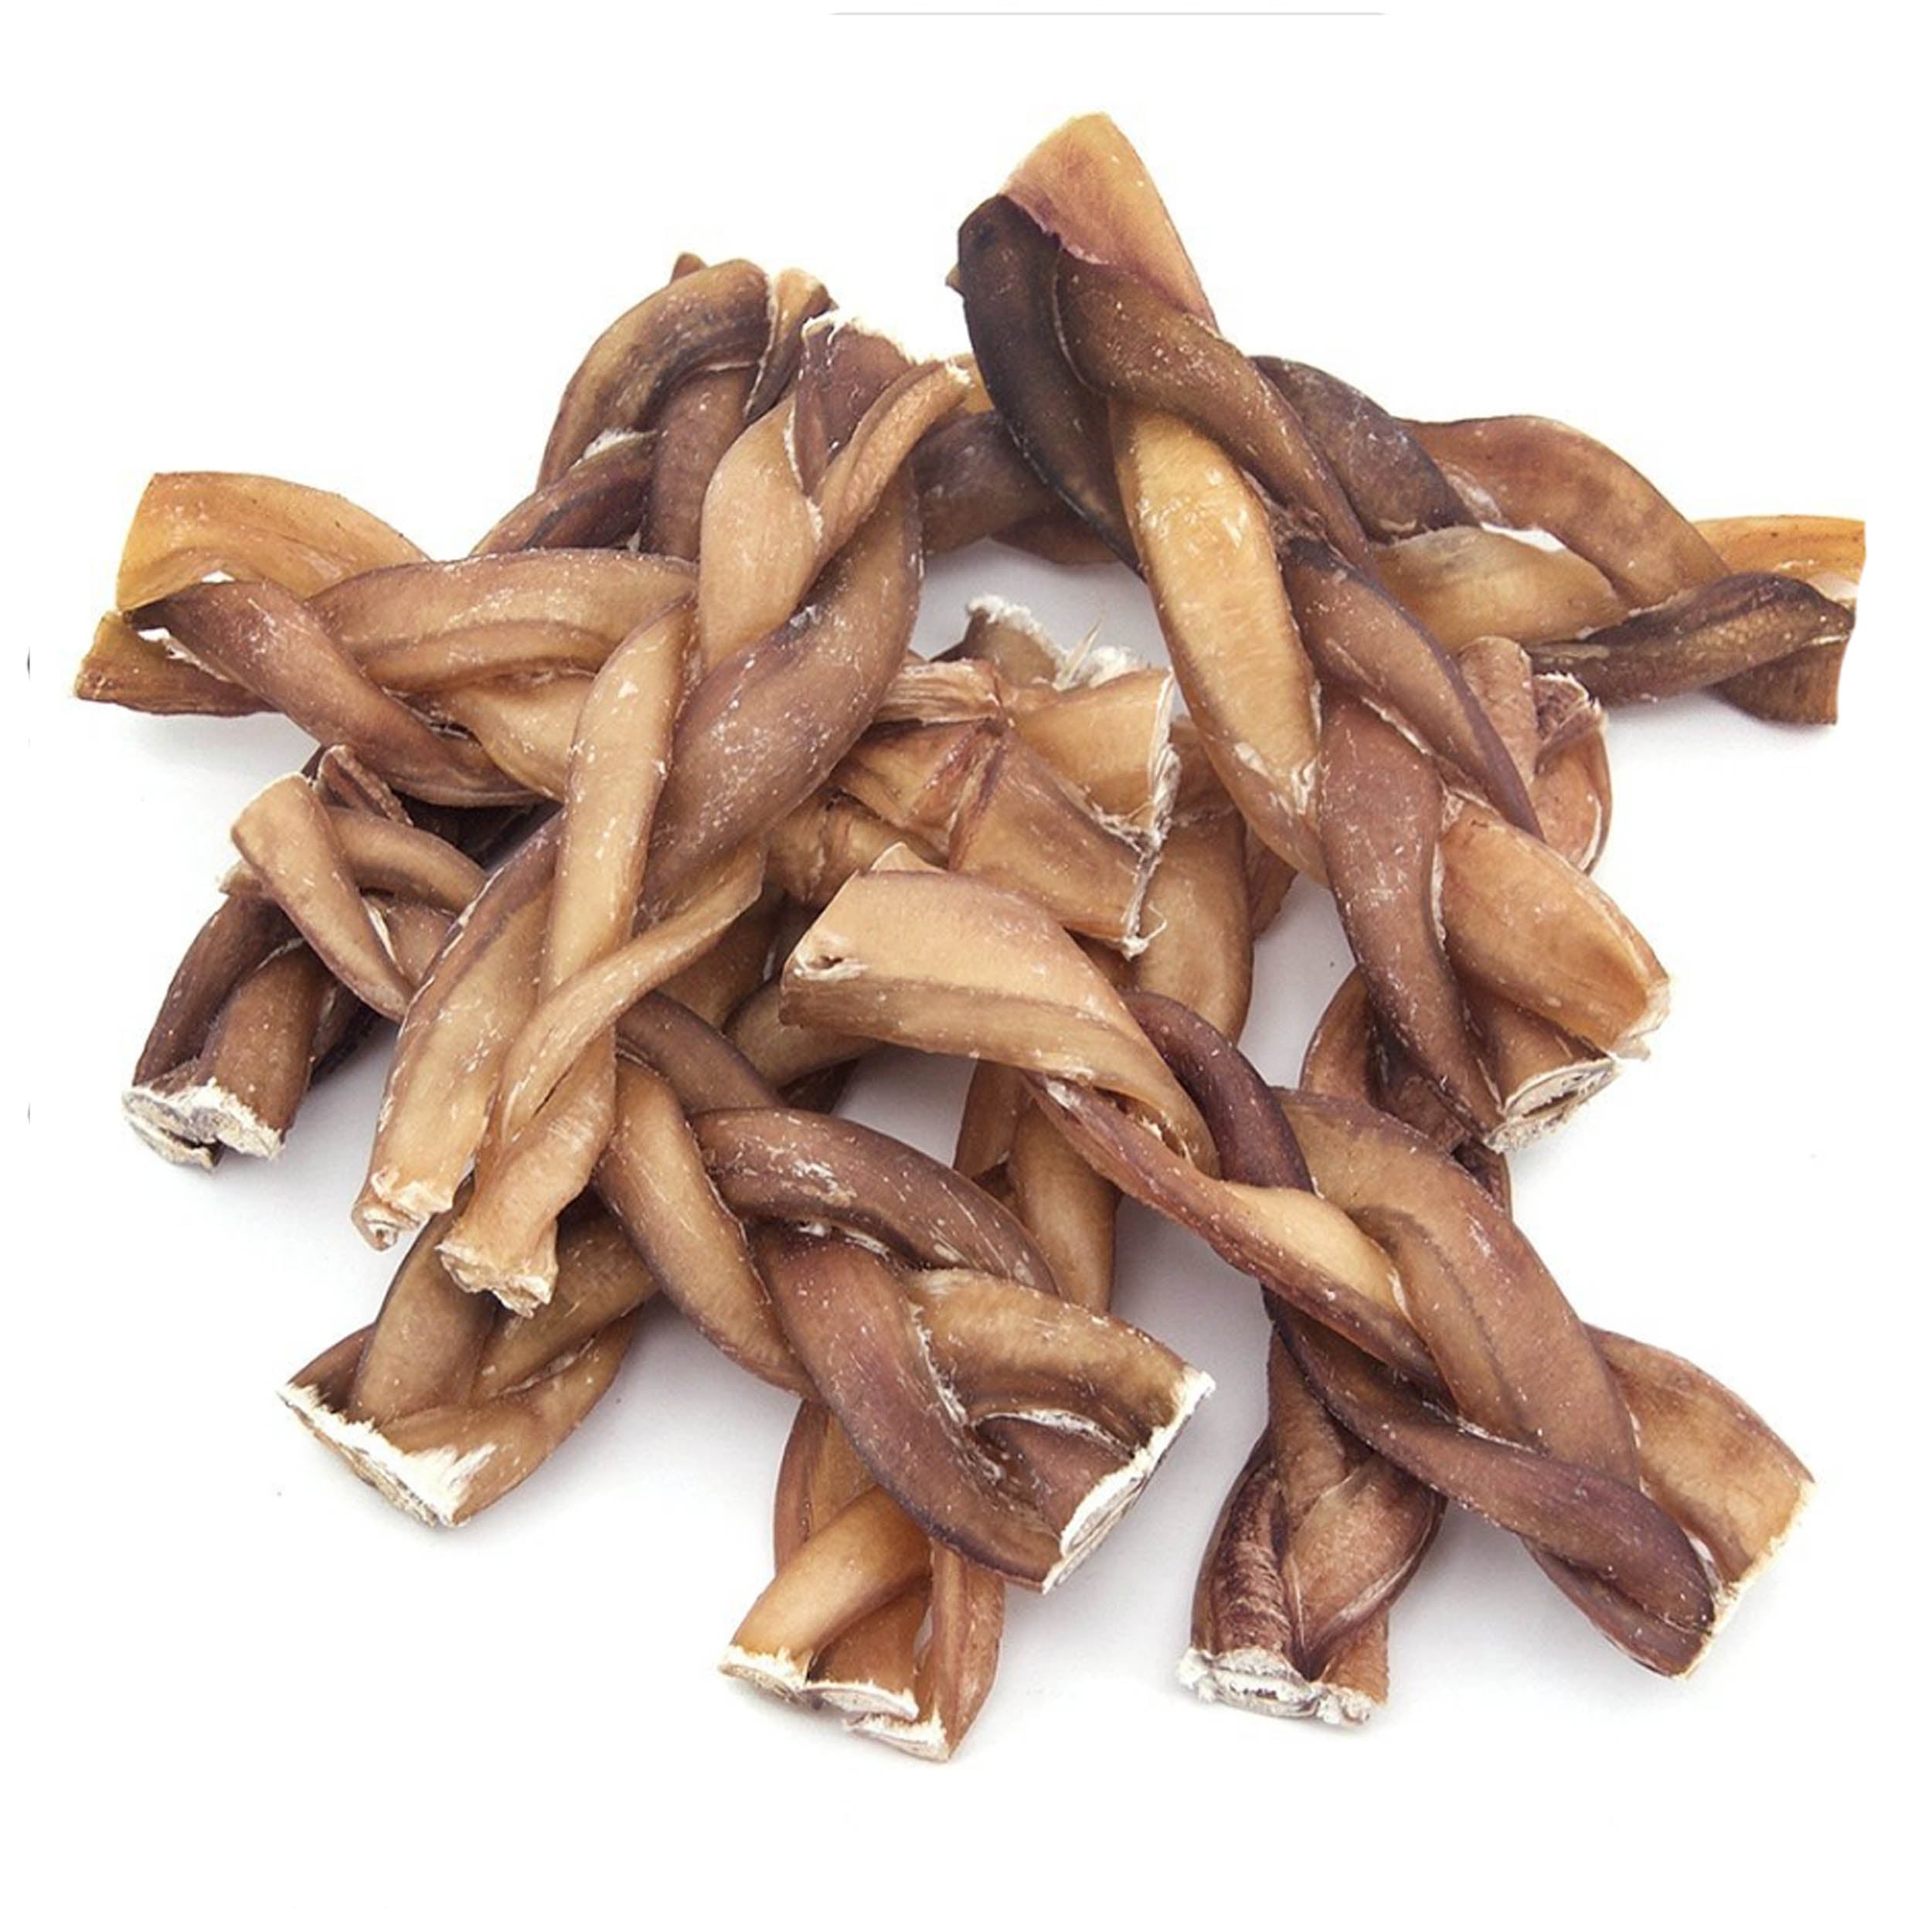 Thick Braided Bully Stick 100% Naturally Made From grass fed cows. All Natural Chew for dogs odor free organically produced to promote healthy teeth and gums 6 Inch bunch 